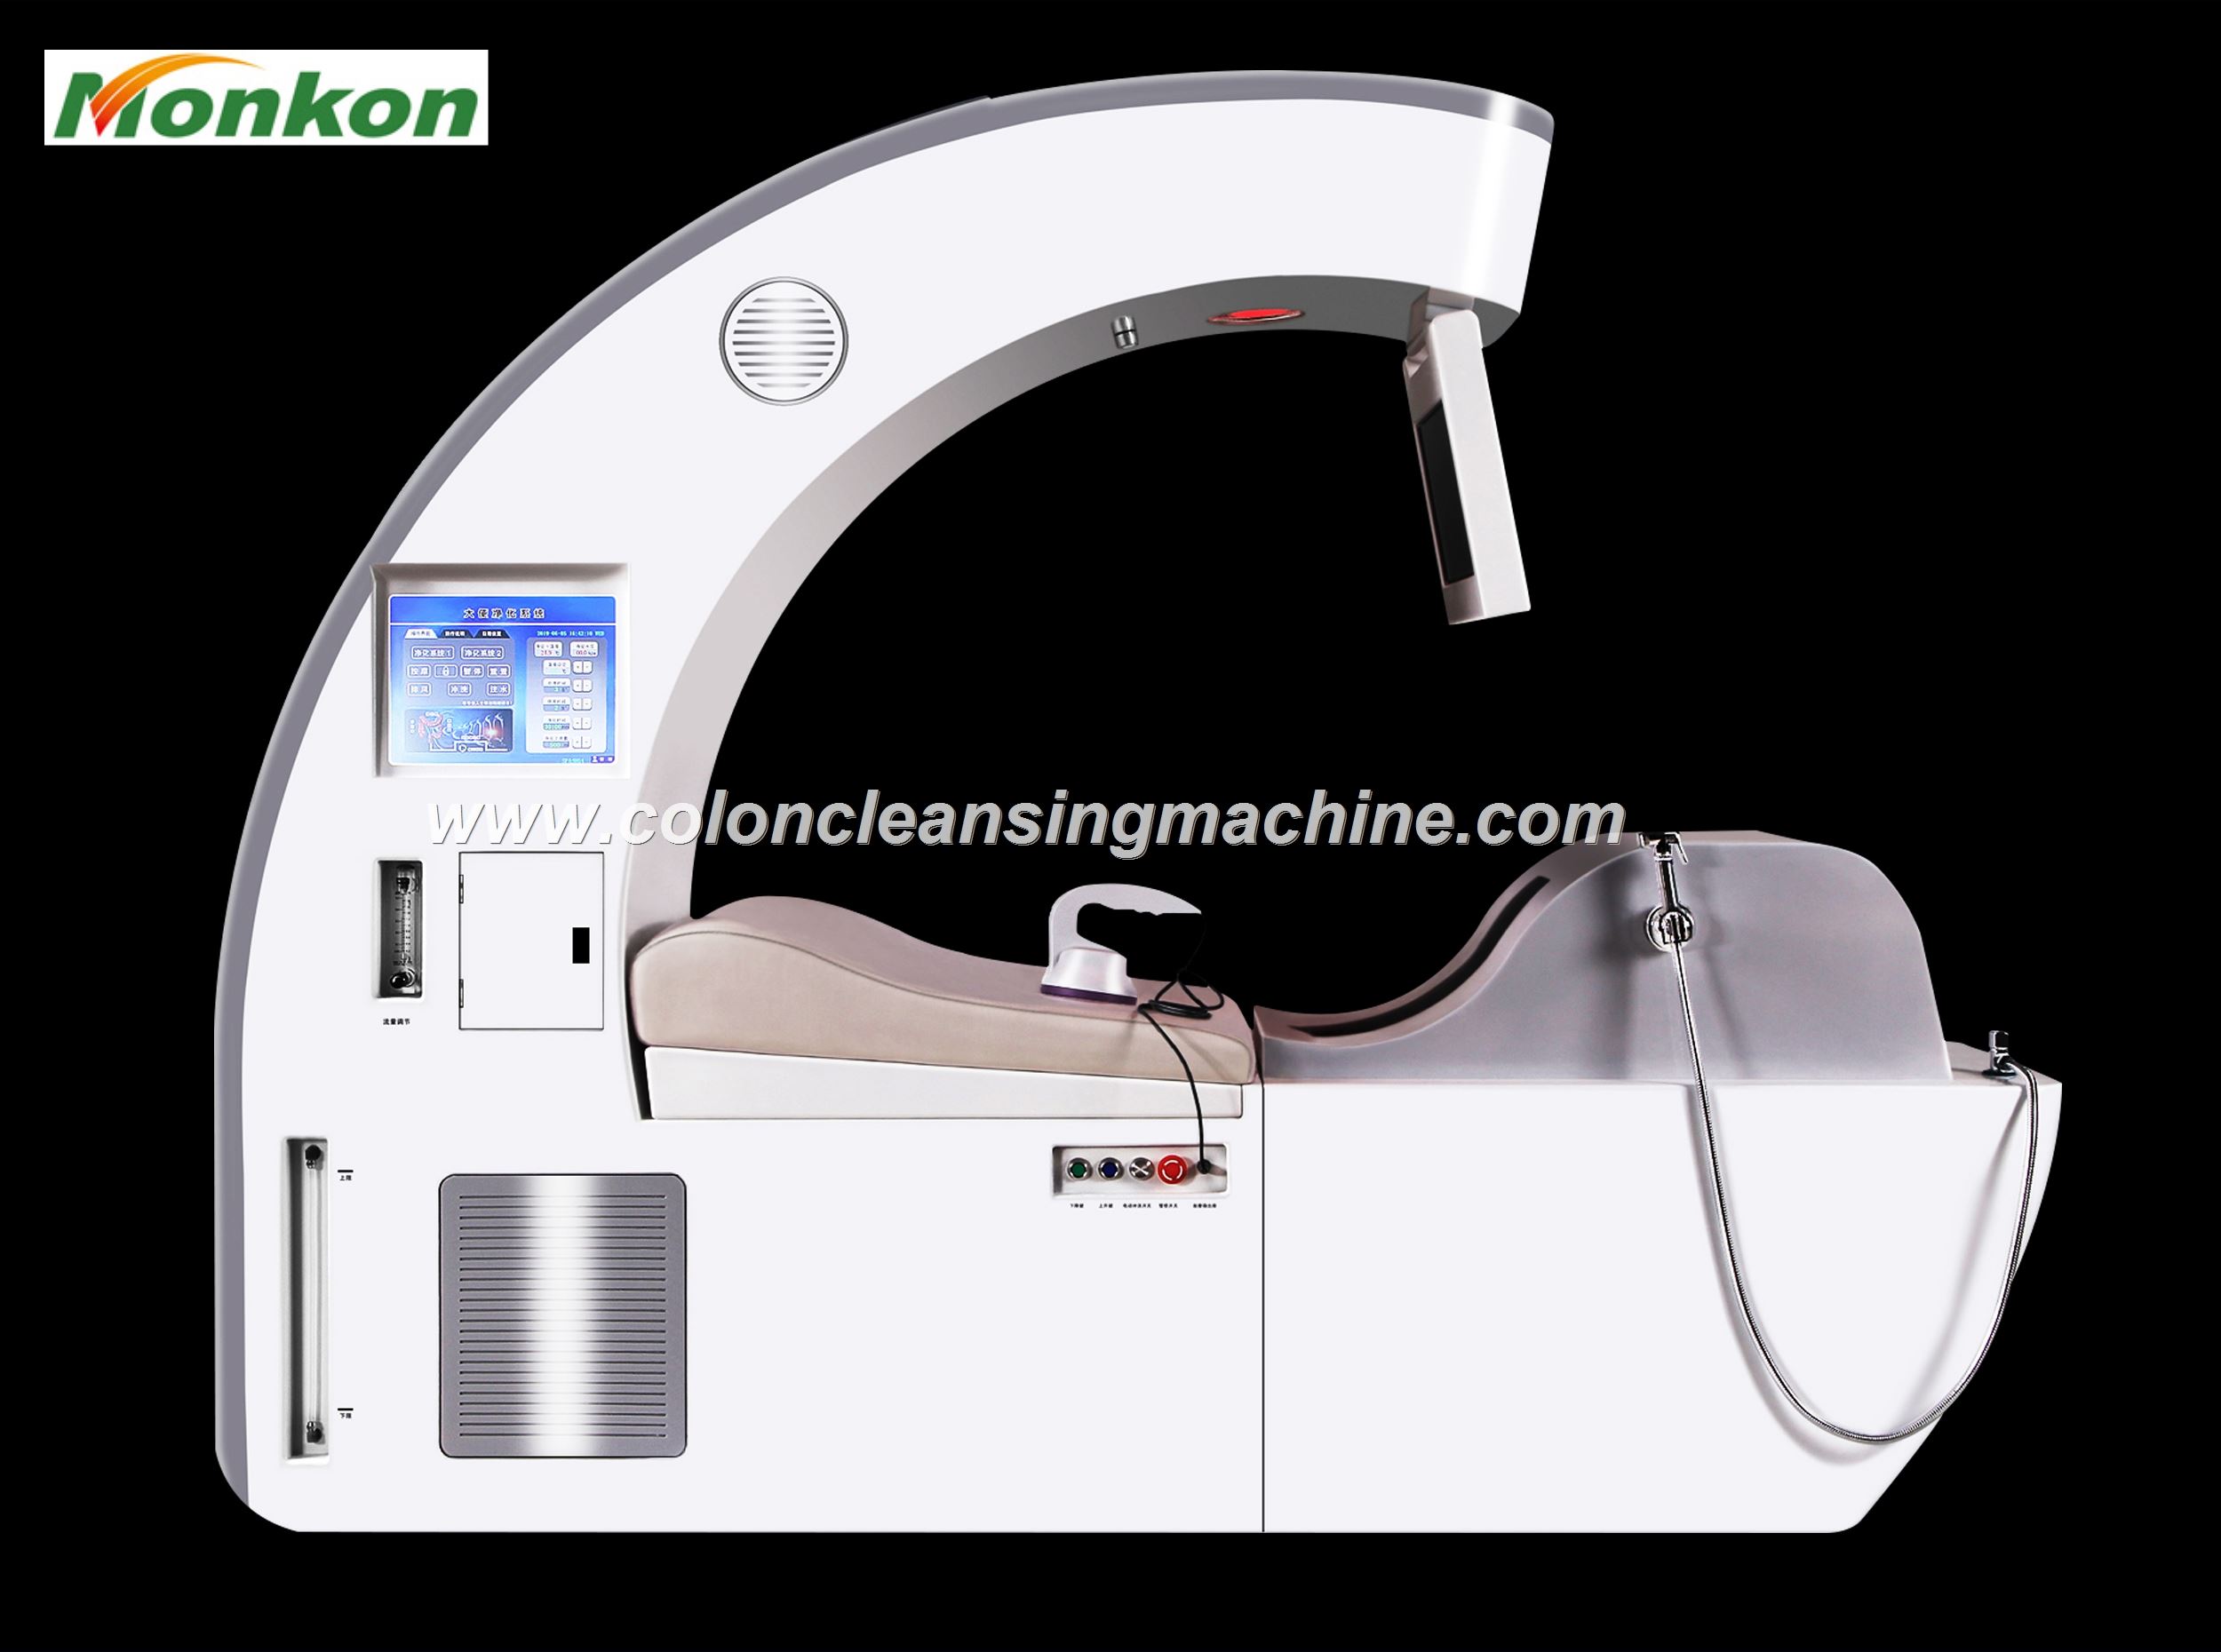 Buy MAIKONG Colonic machine,colonic hydrotherapy london,colon hydrotherapy slo